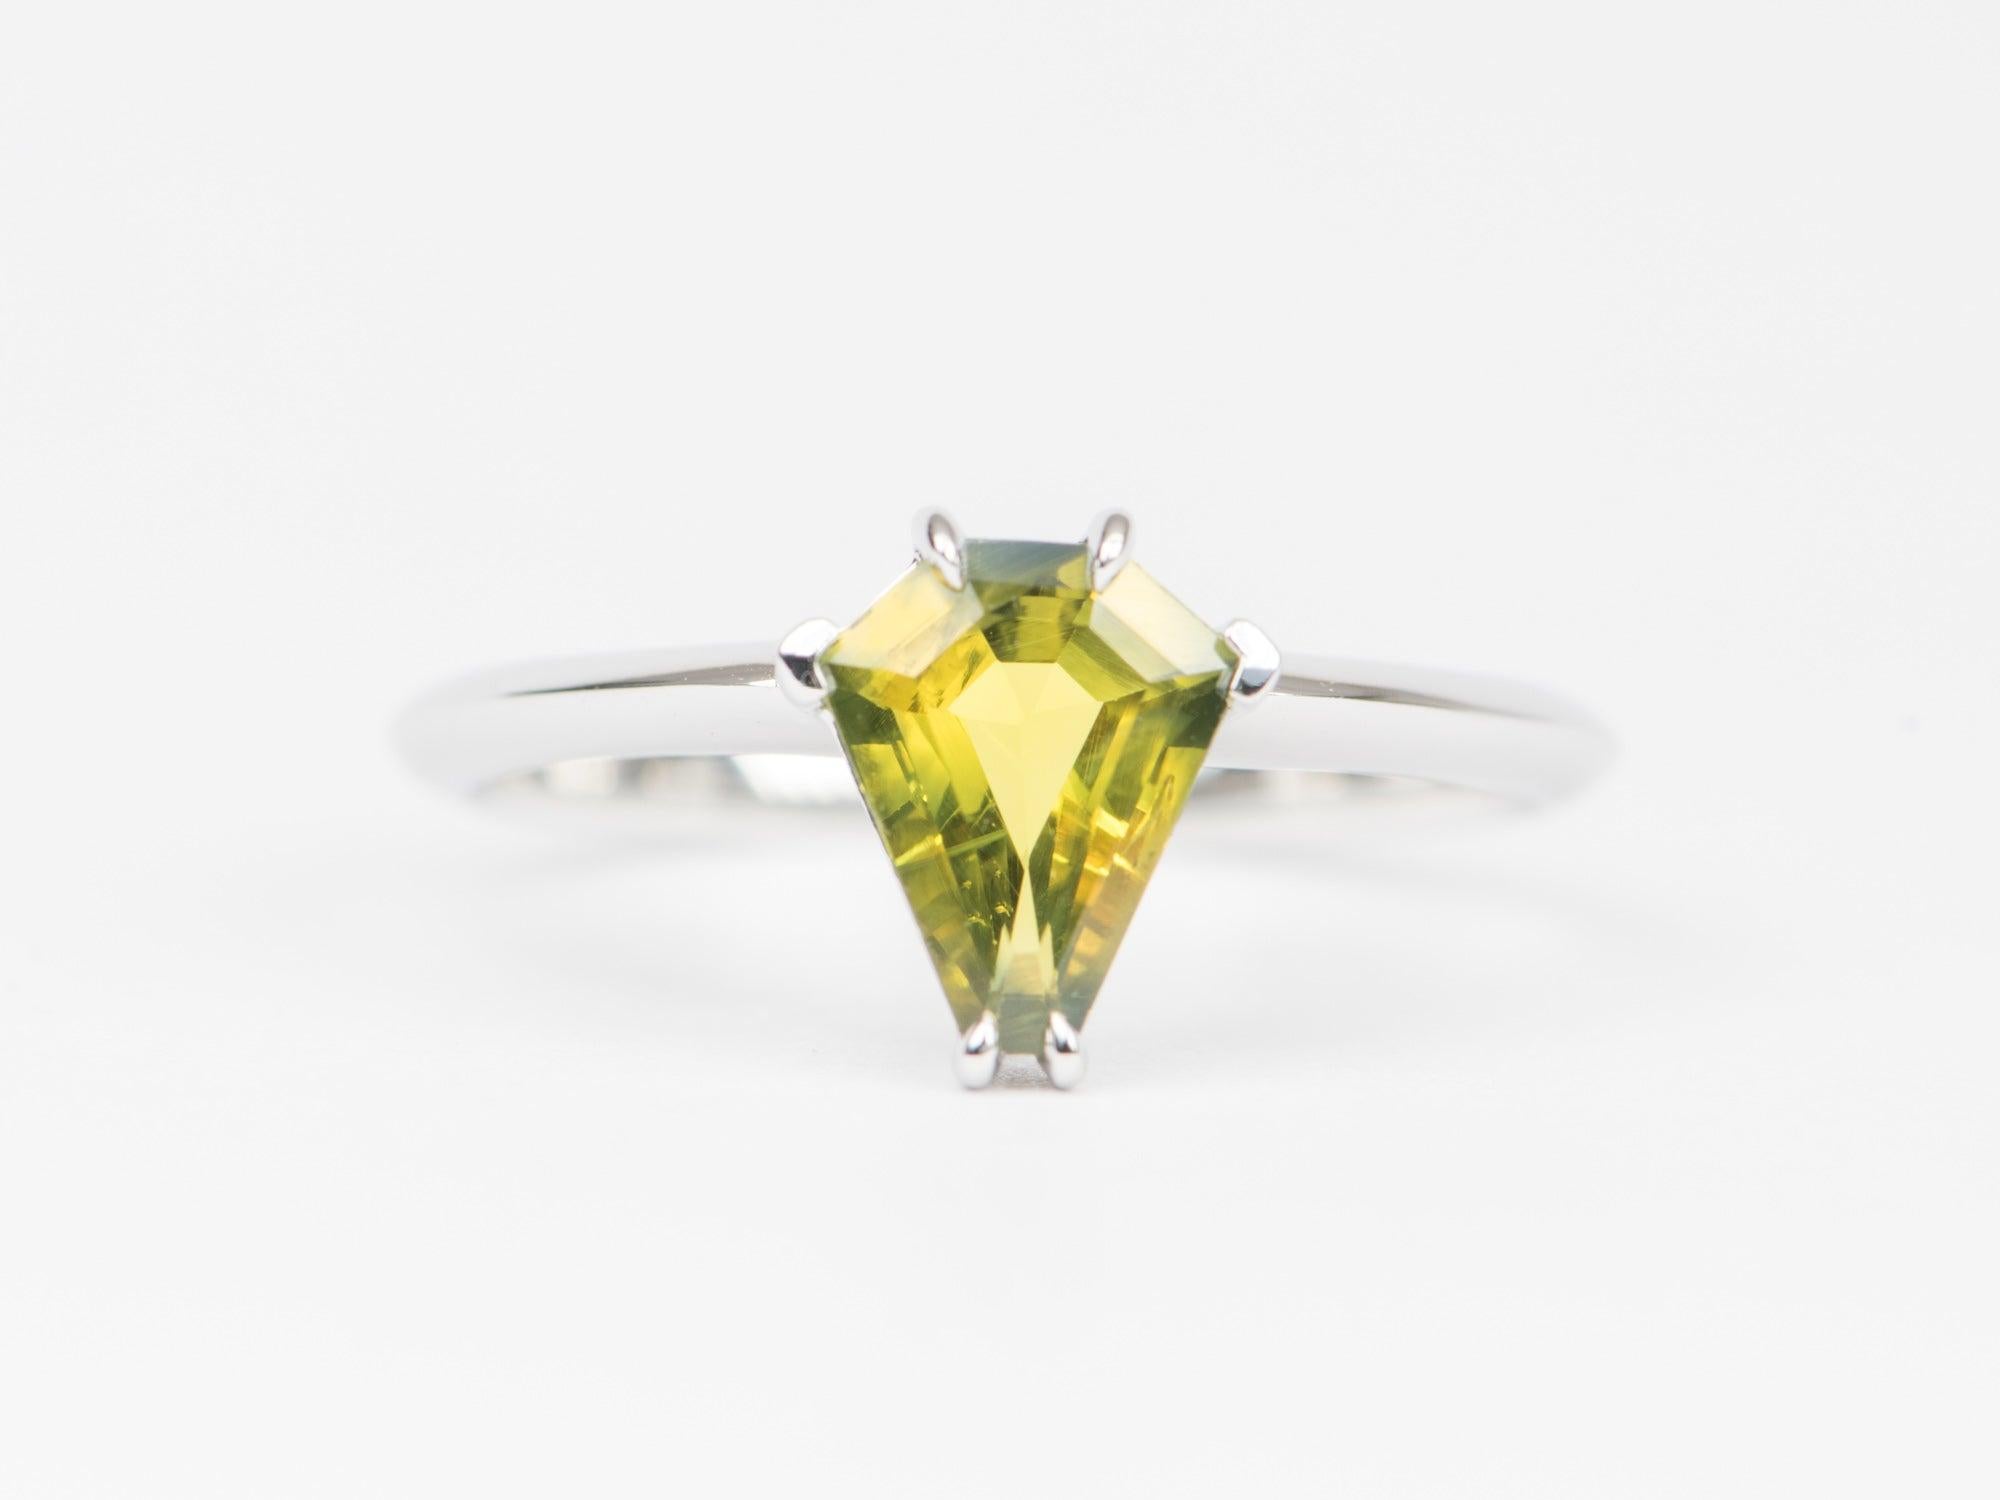 ♥ Solid 14k white gold ring set with a beautiful Madagascar parti sapphire
♥ Gorgeous yellow green color!
♥ The item measures 9.3mm in length, 8mm in width, and stands 4.8mm from the finger

♥ US Size 7(Free resizing up or down 1 size)
♥ Band width: